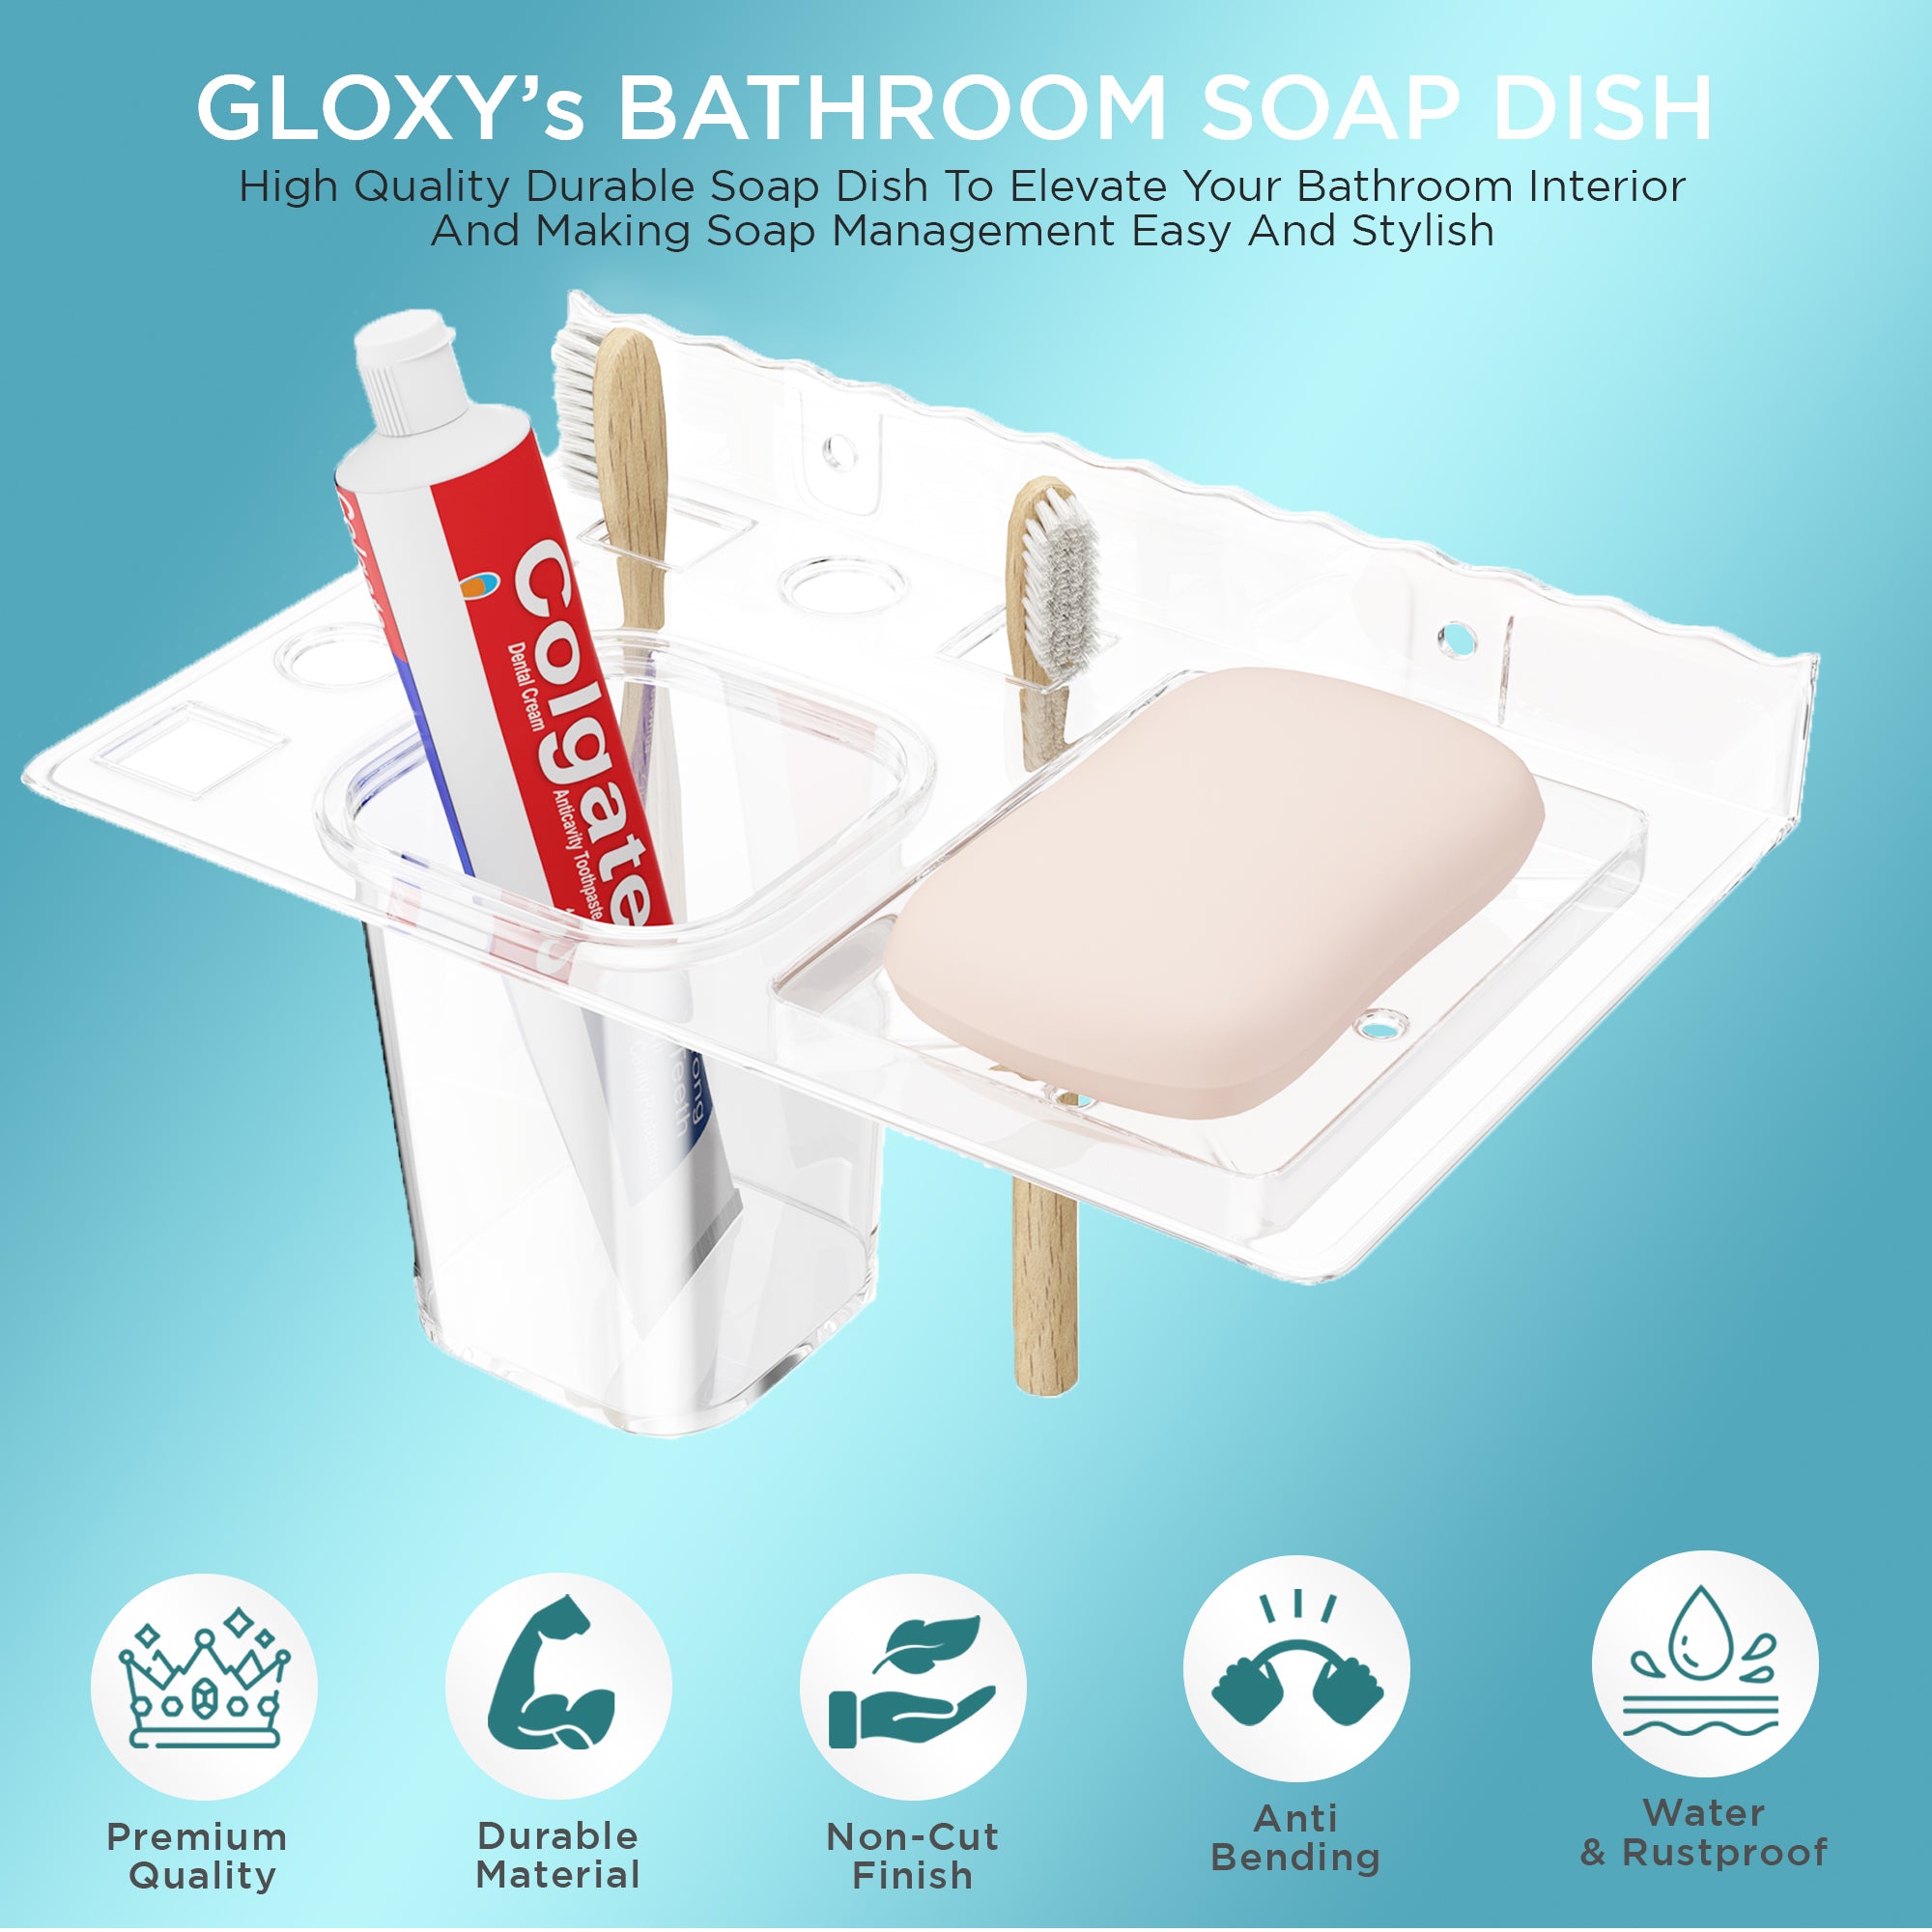 GLOXY® Unbreakable transparent Soap Dish with Toothbrush & Tumbler Holder Shelf - Stylish Bathroom Accessories.